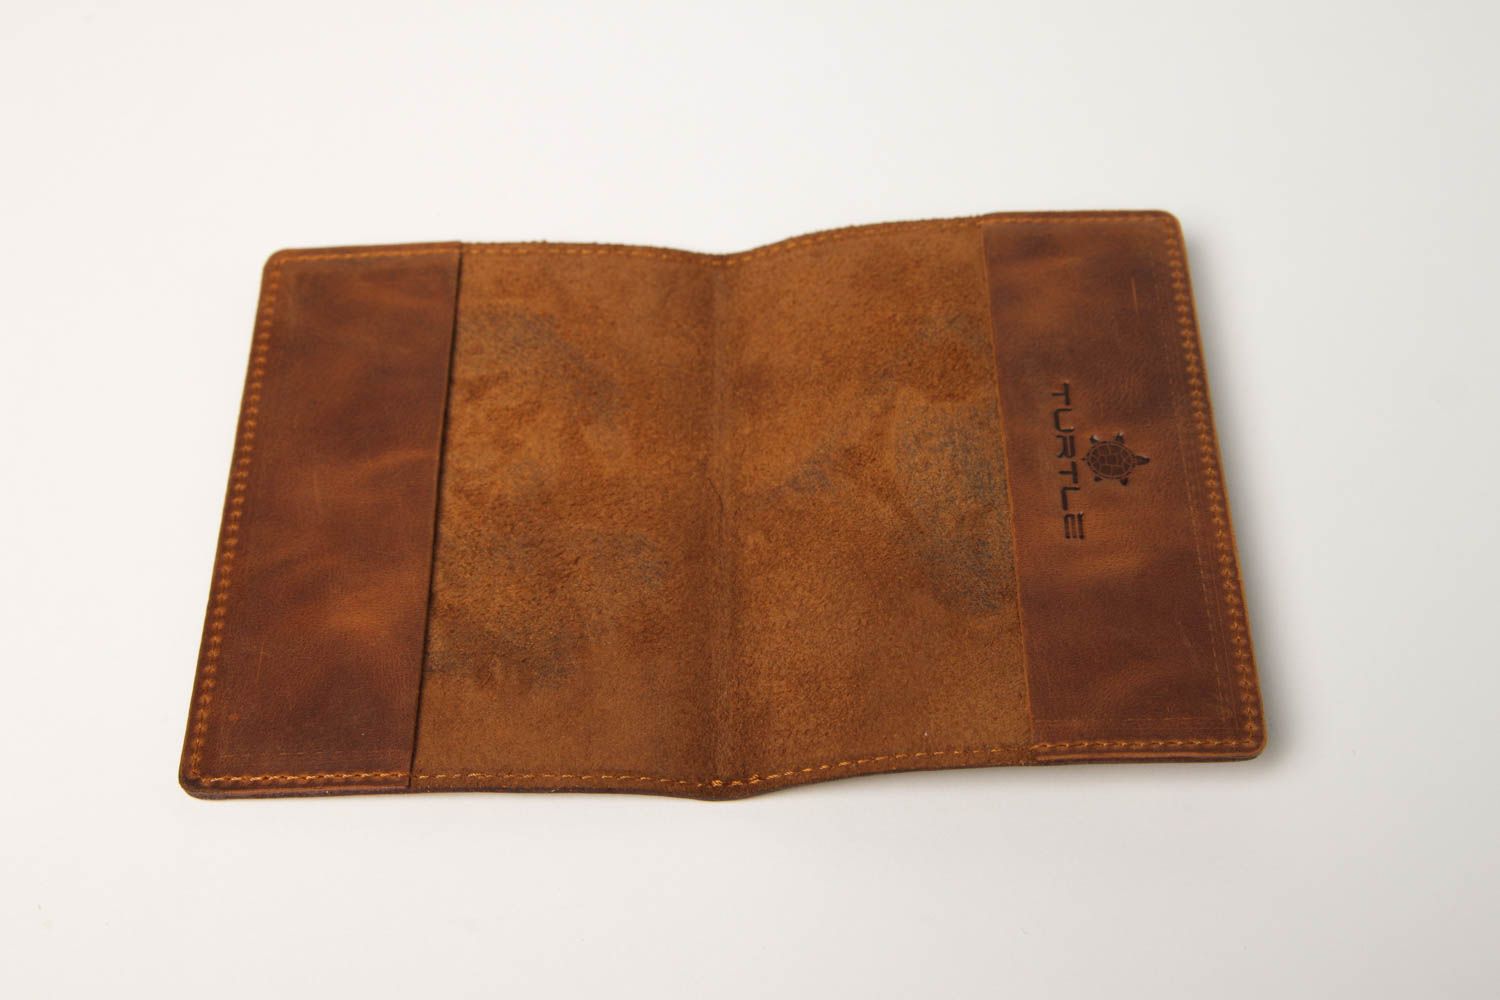 Beautiful handmade passport cover fashion accessories leather goods gift ideas photo 4